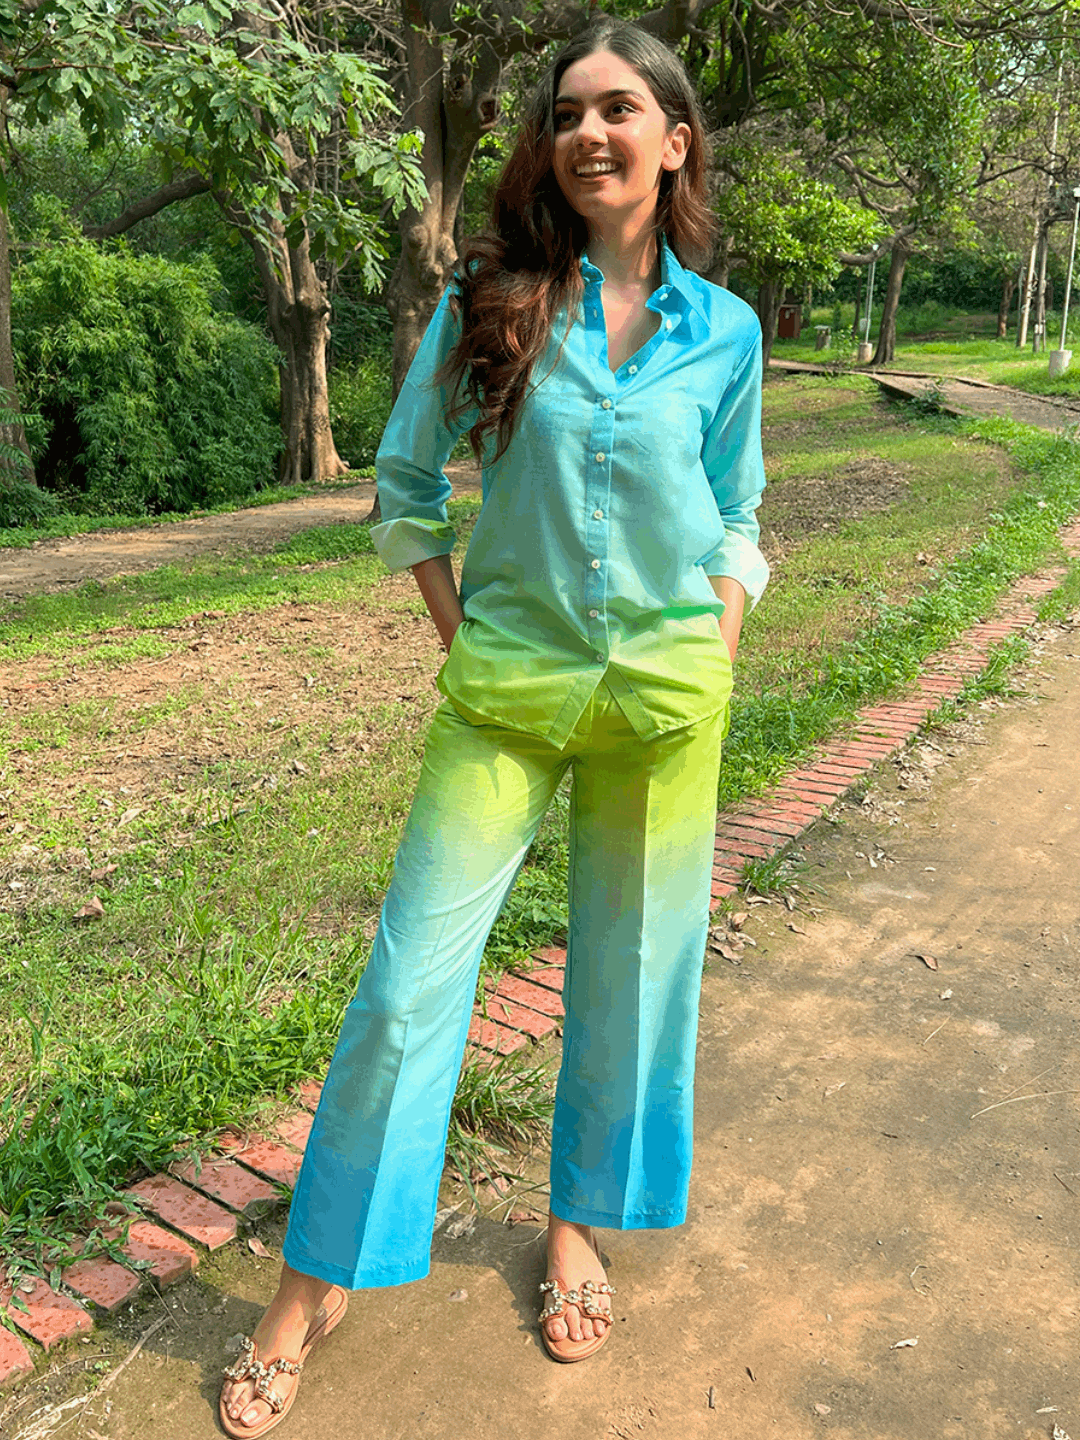 The model in the image is wearing Ombre Cotton Neon Co ord Set from Alice Milan. Crafted with the finest materials and impeccable attention to detail, the Co-ord Set looks premium, trendy, luxurious and offers unparalleled comfort. It’s a perfect clothing option for loungewear, resort wear, party wear or for an airport look. The woman in the image looks happy, and confident with her style statement putting a happy smile on her face.